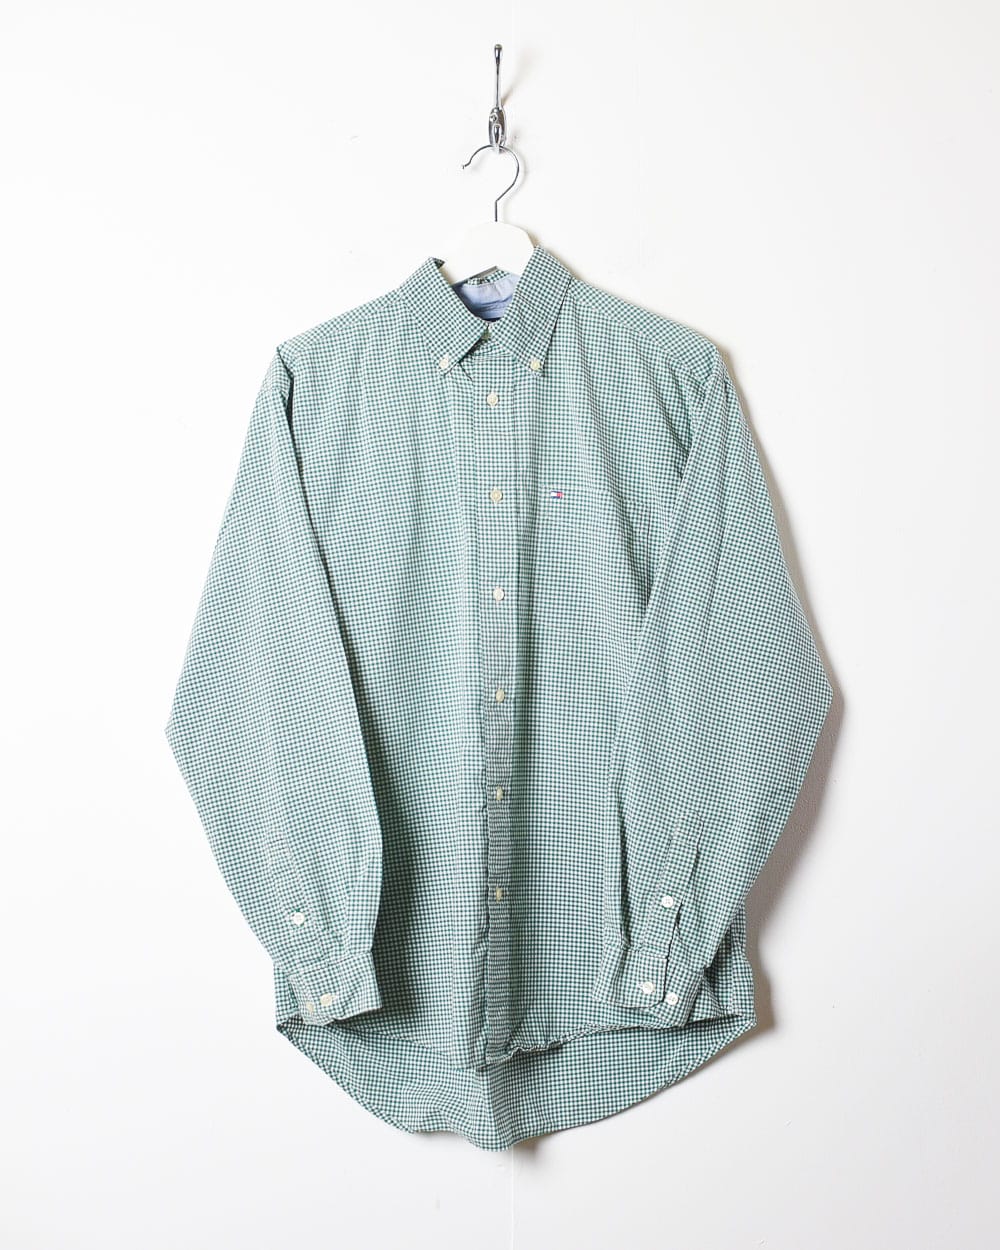 Green Tommy Hilfiger Checked Shirt - Small